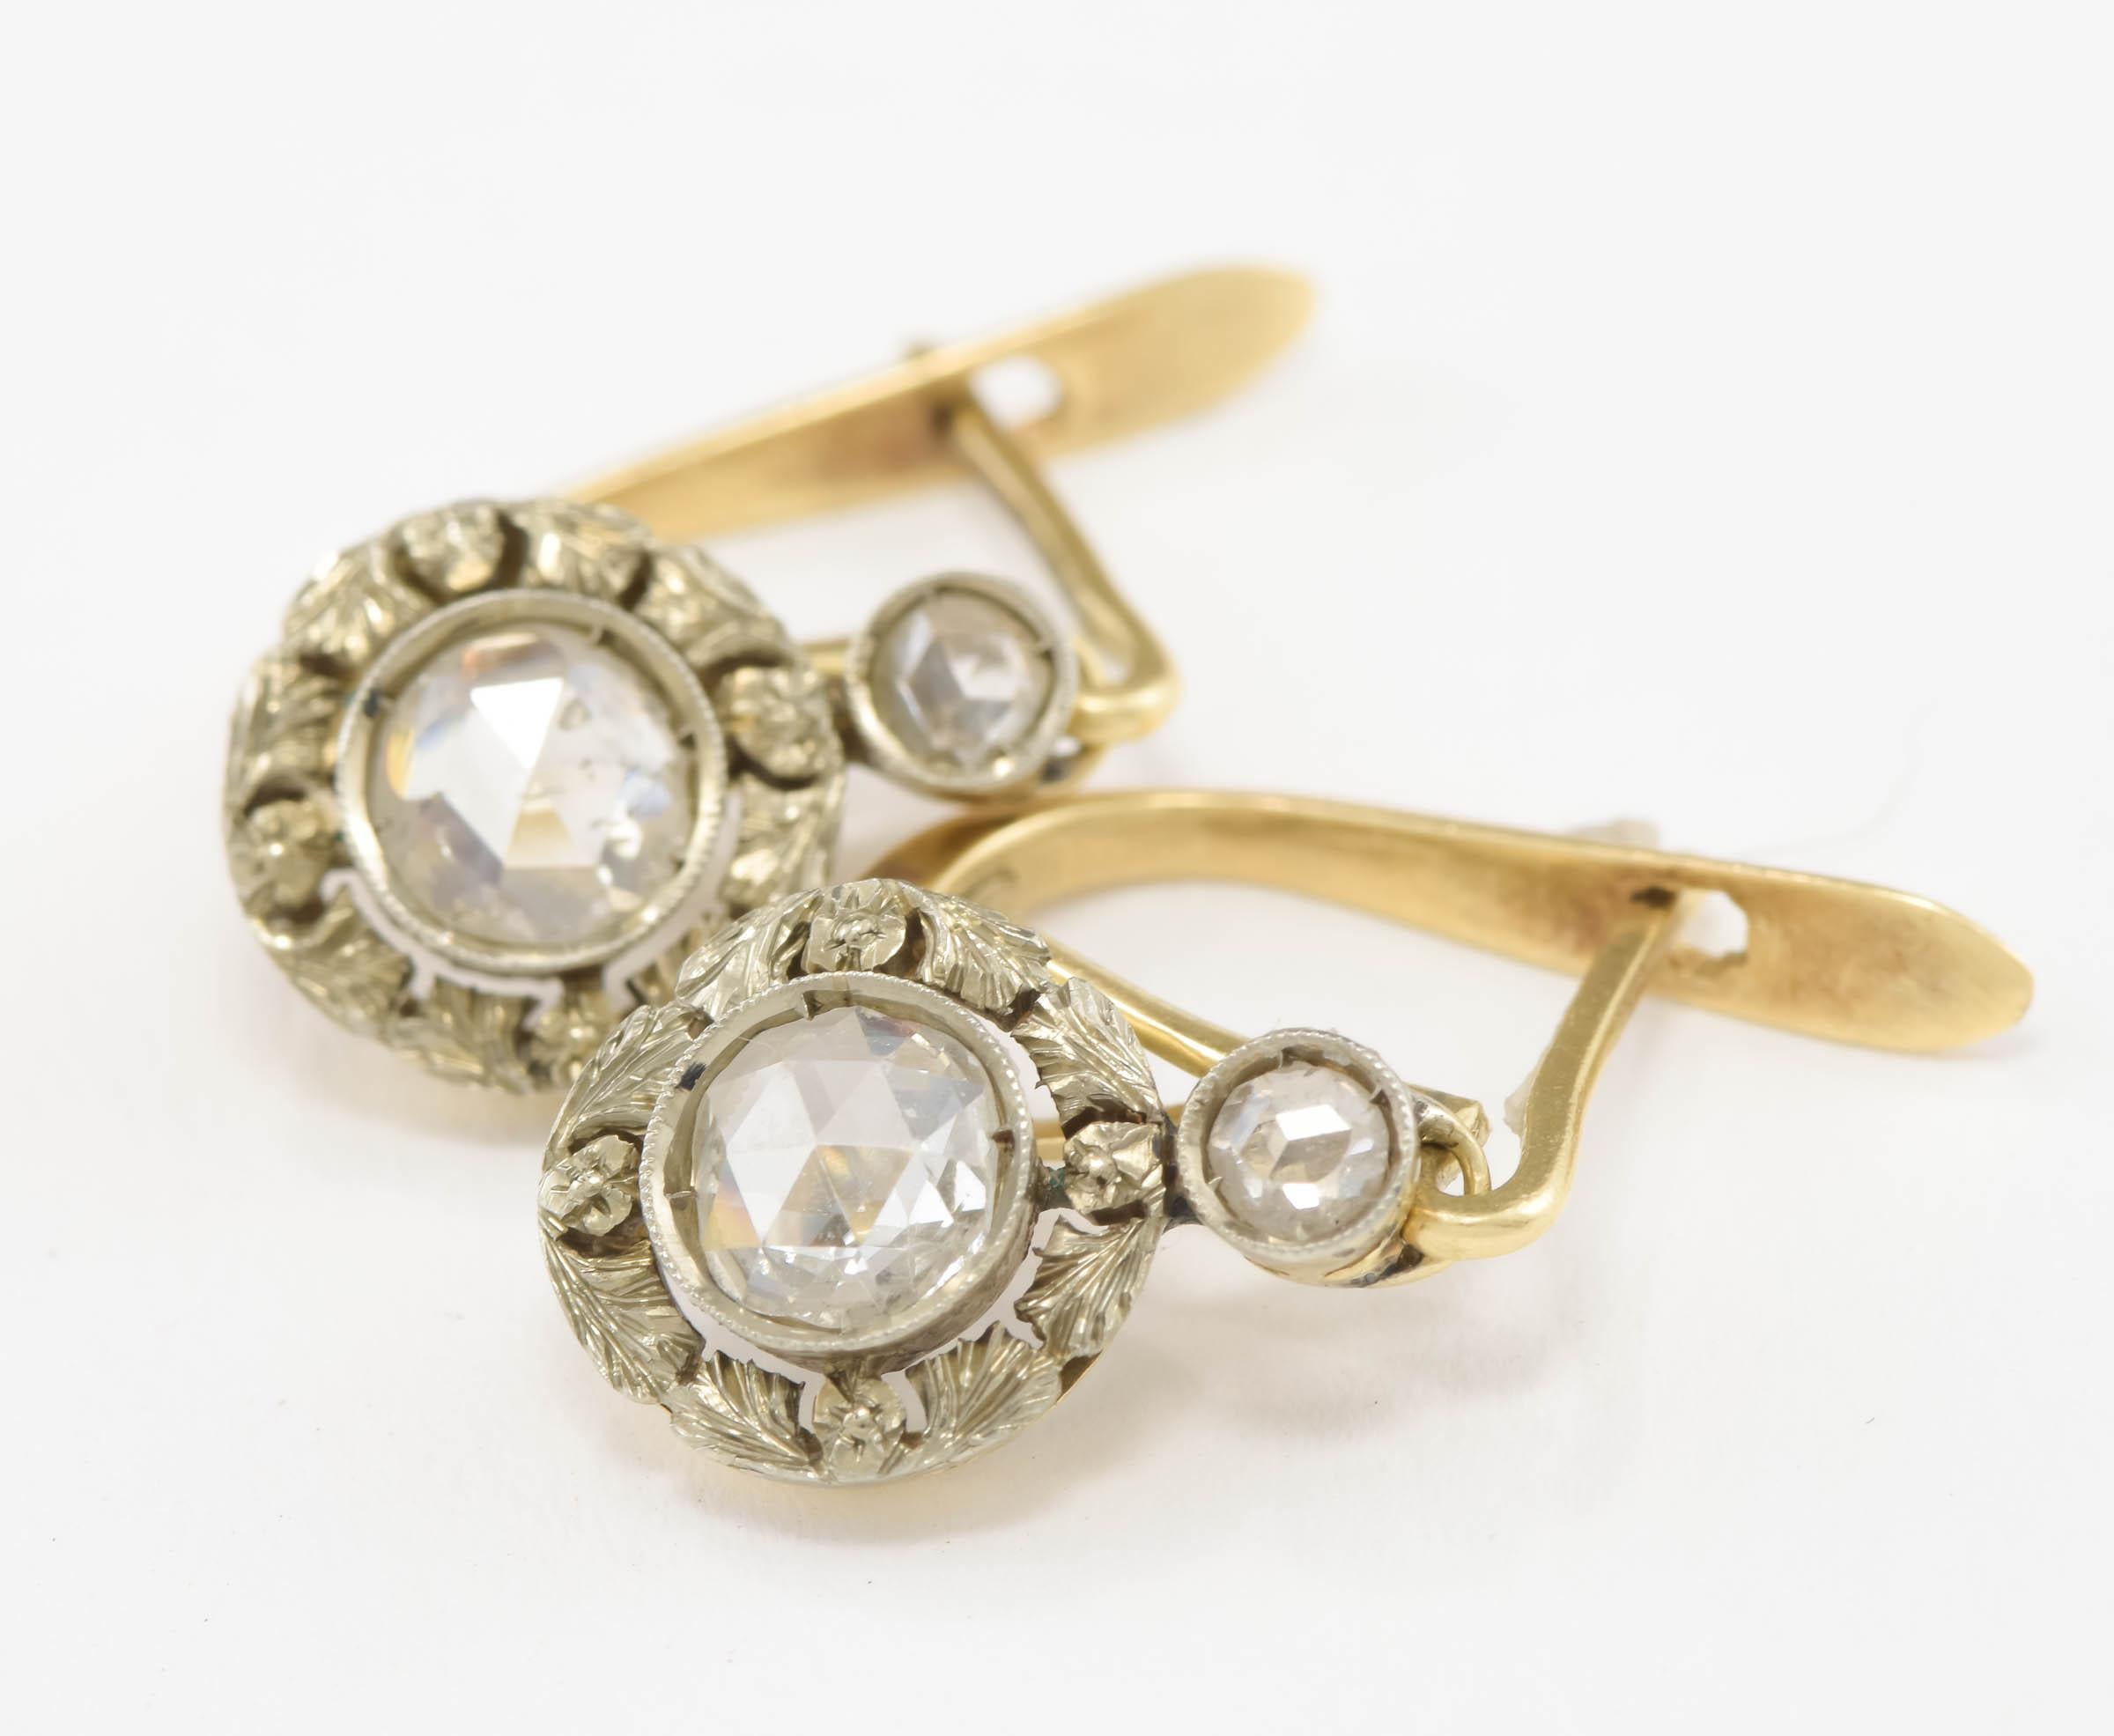 Dainty and charming, this lovely pair of sparkly rose cut diamond earrings dates to the 1930's late Art Deco period.  The pretty diamond drops may be removed from the 14K yellow gold ear wires, allowing one to add other dangle style drops, if